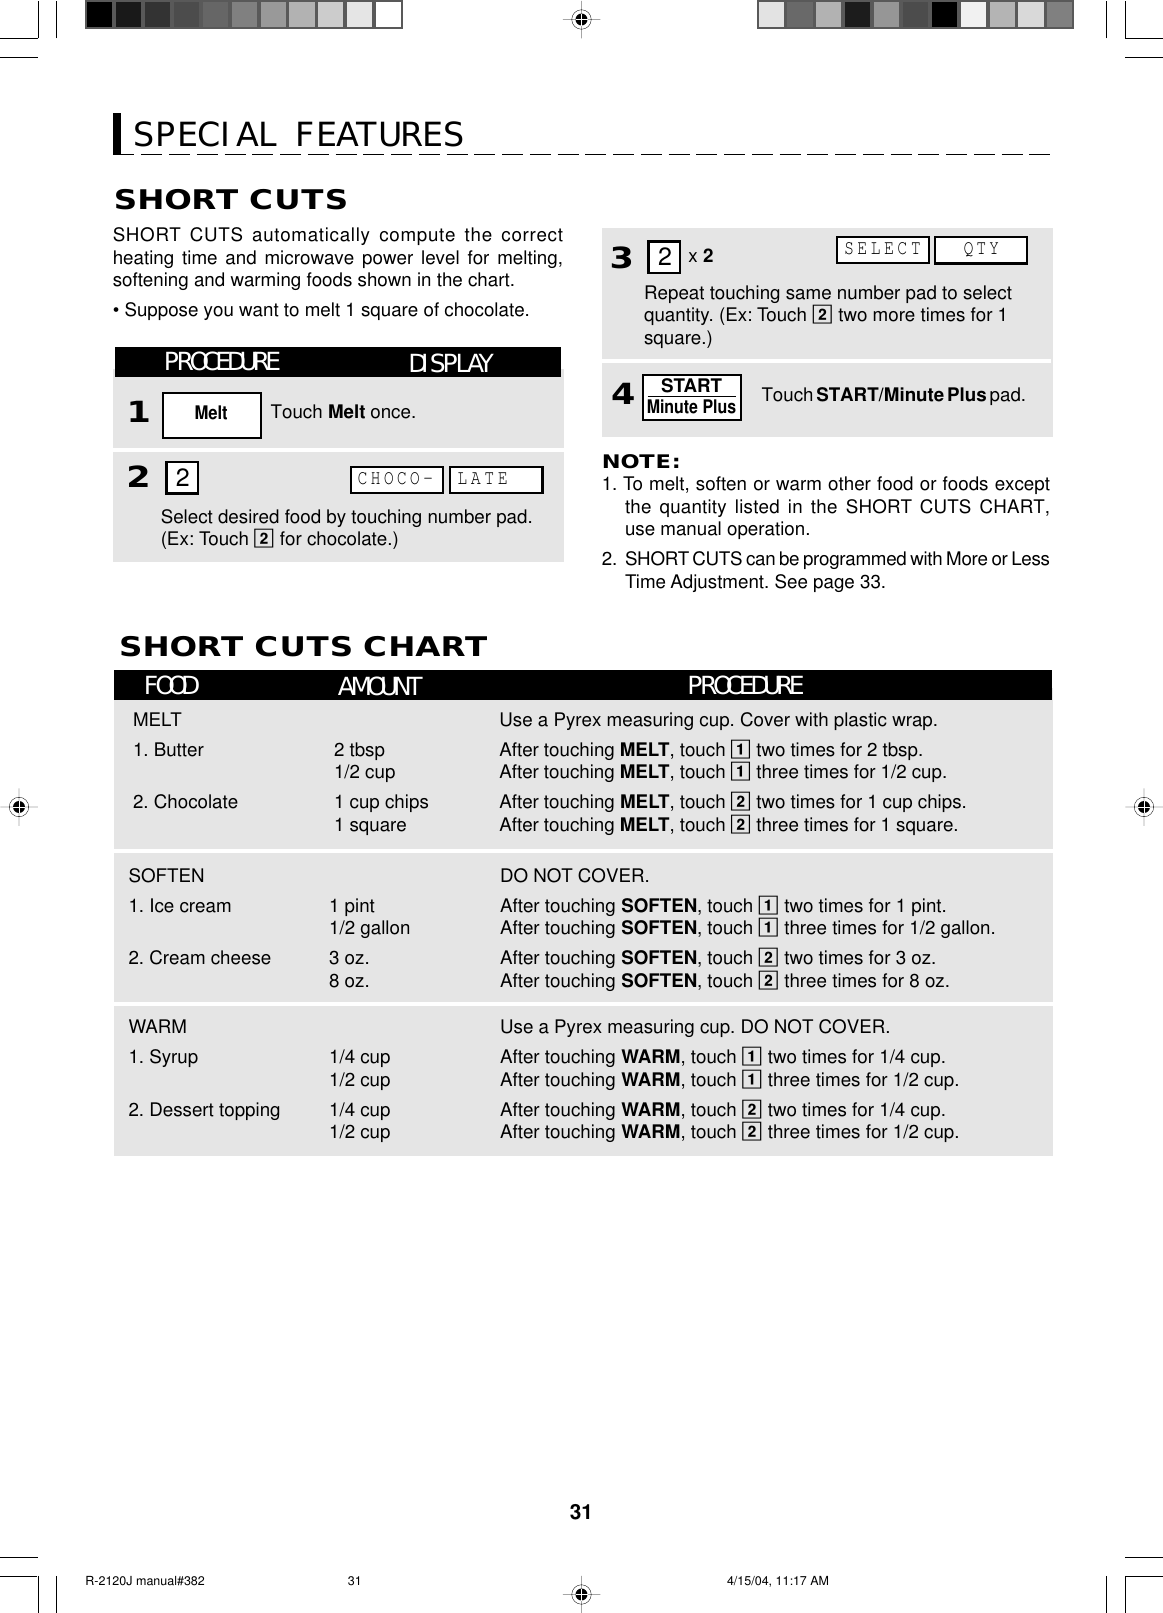 31SPECIAL FEATURESSHORT CUTSSHORT CUTS automatically compute the correctheating time and microwave power level for melting,softening and warming foods shown in the chart.• Suppose you want to melt 1 square of chocolate.NOTE:1. To melt, soften or warm other food or foods exceptthe quantity listed in the SHORT CUTS CHART,use manual operation.2. SHORT CUTS can be programmed with More or LessTime Adjustment. See page 33.SHORT CUTS CHART34Repeat touching same number pad to selectquantity. (Ex: Touch 2 two more times for 1square.)Touch START/Minute Plus pad.STARTMinute Plus2x 2FOOD AMOUNT PROCEDUREMELT1. Butter2. Chocolate2 tbsp1/2 cup1 cup chips1 squareUse a Pyrex measuring cup. Cover with plastic wrap.After touching MELT, touch 1 two times for 2 tbsp.After touching MELT, touch 1 three times for 1/2 cup.After touching MELT, touch 2 two times for 1 cup chips.After touching MELT, touch 2 three times for 1 square.SOFTEN1. Ice cream2. Cream cheese1 pint1/2 gallon3 oz.8 oz.DO NOT COVER.After touching SOFTEN, touch 1 two times for 1 pint.After touching SOFTEN, touch 1 three times for 1/2 gallon.After touching SOFTEN, touch 2 two times for 3 oz.After touching SOFTEN, touch 2 three times for 8 oz.WARM1. Syrup2. Dessert topping1/4 cup1/2 cup1/4 cup1/2 cupUse a Pyrex measuring cup. DO NOT COVER.After touching WARM, touch 1 two times for 1/4 cup.After touching WARM, touch 1 three times for 1/2 cup.After touching WARM, touch 2 two times for 1/4 cup.After touching WARM, touch 2 three times for 1/2 cup.PROCEDURE12DISPLAYTouch Melt once.MeltSelect desired food by touching number pad.(Ex: Touch 2 for chocolate.)CHOCO- LATE2QTYSELECTR-2120J manual#382 4/15/04, 11:17 AM31